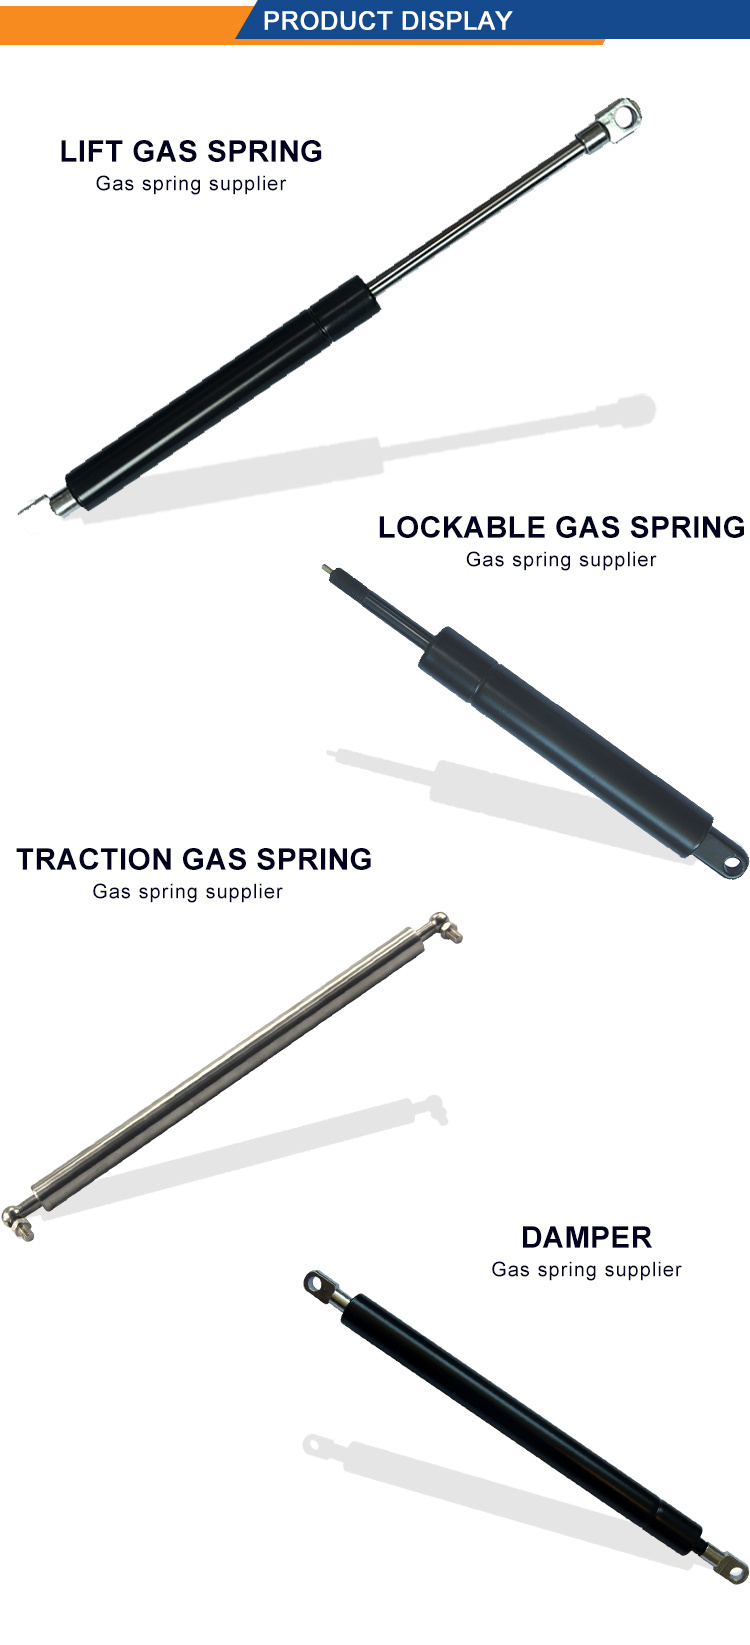 Adjustable and Lockable Gas Spring for Furniture and Automotive